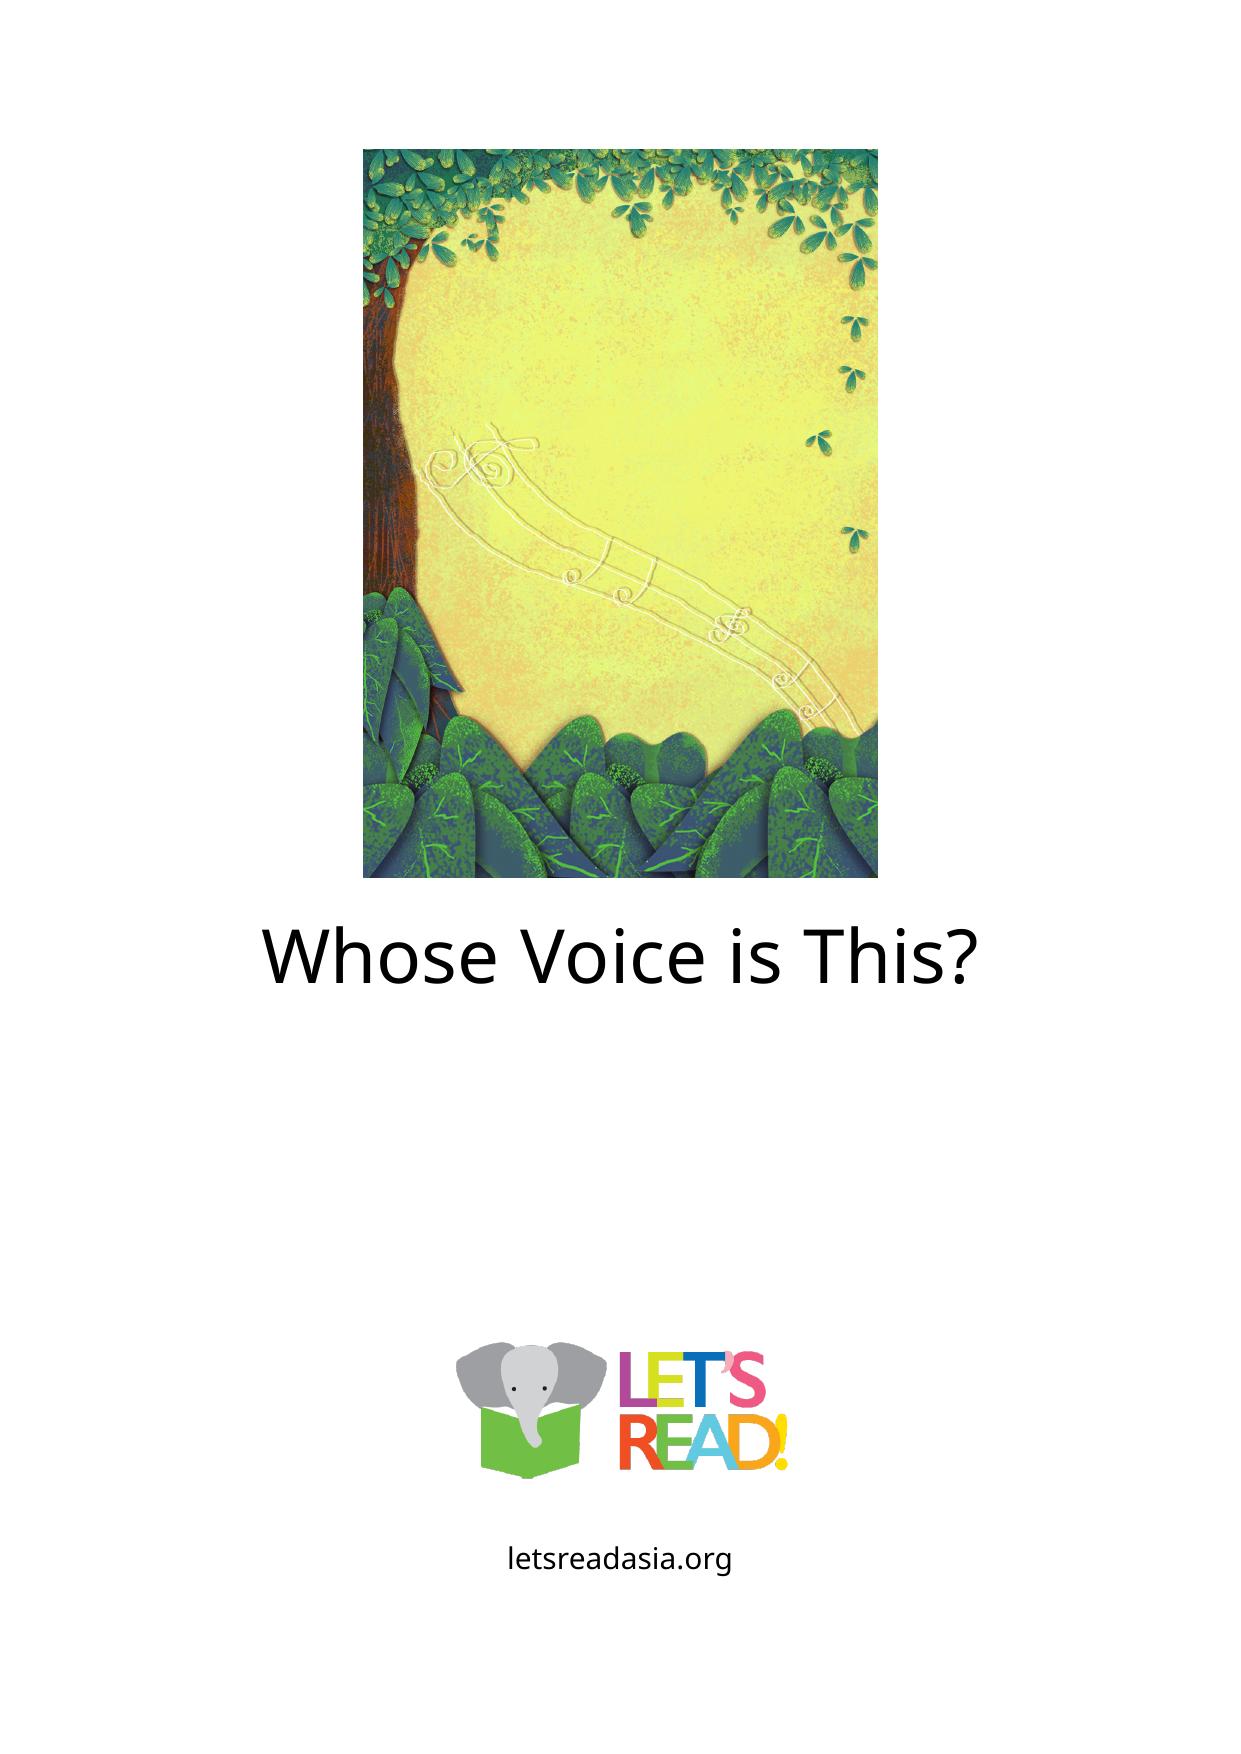 Whose Voice is This?